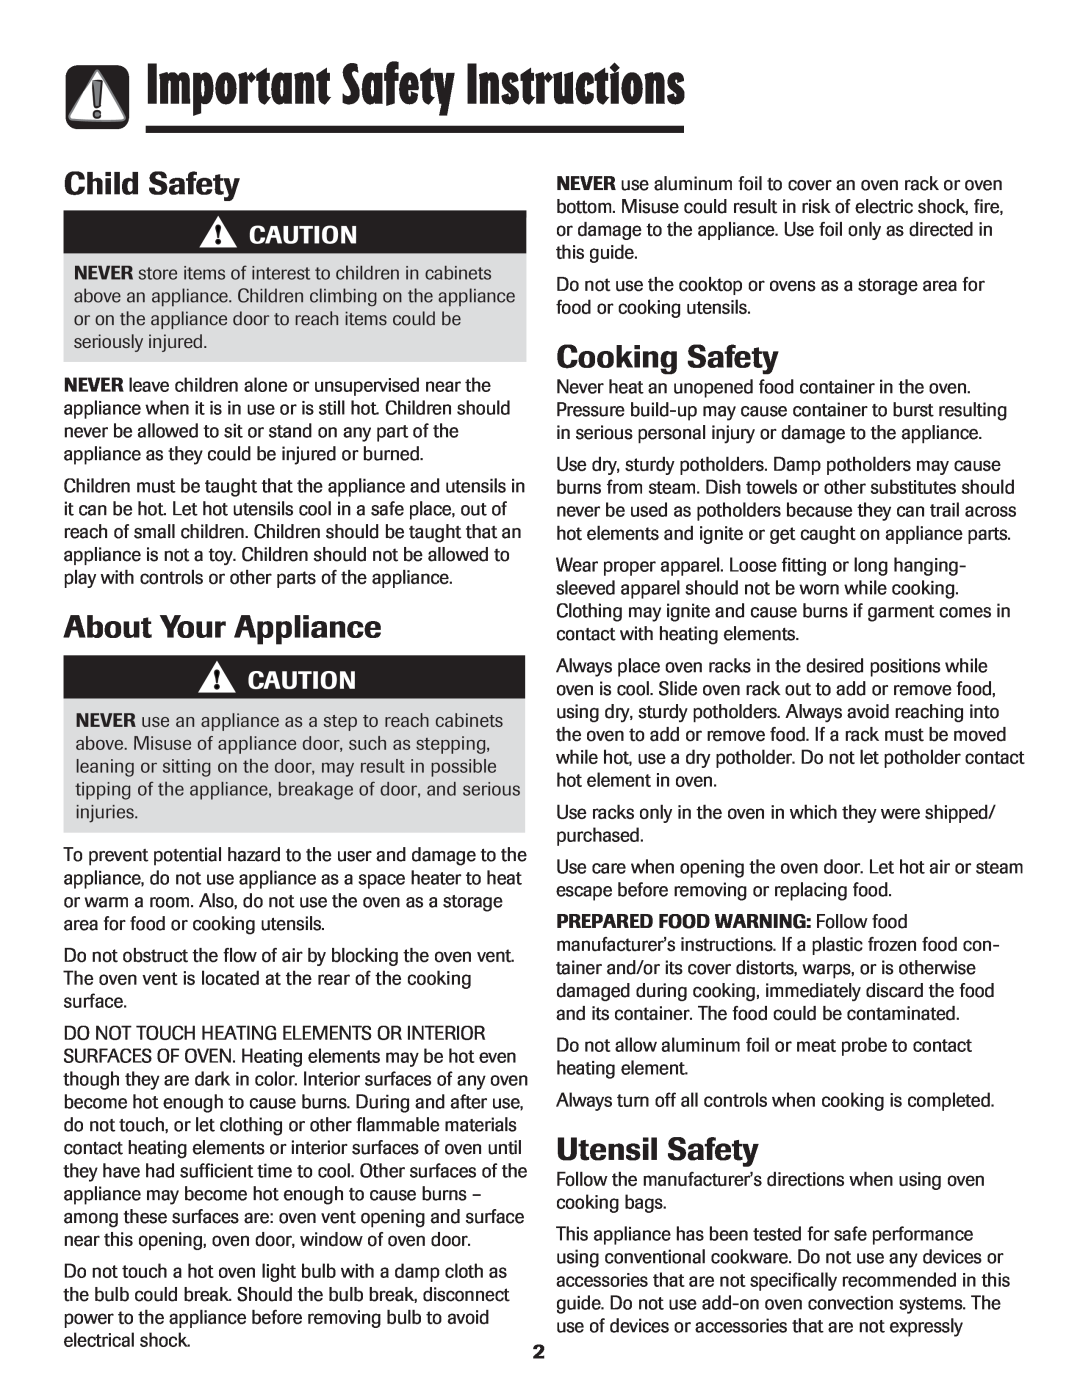 Maytag MES5752BAW manual Important Safety Instructions, Child Safety, About Your Appliance, Cooking Safety, Utensil Safety 